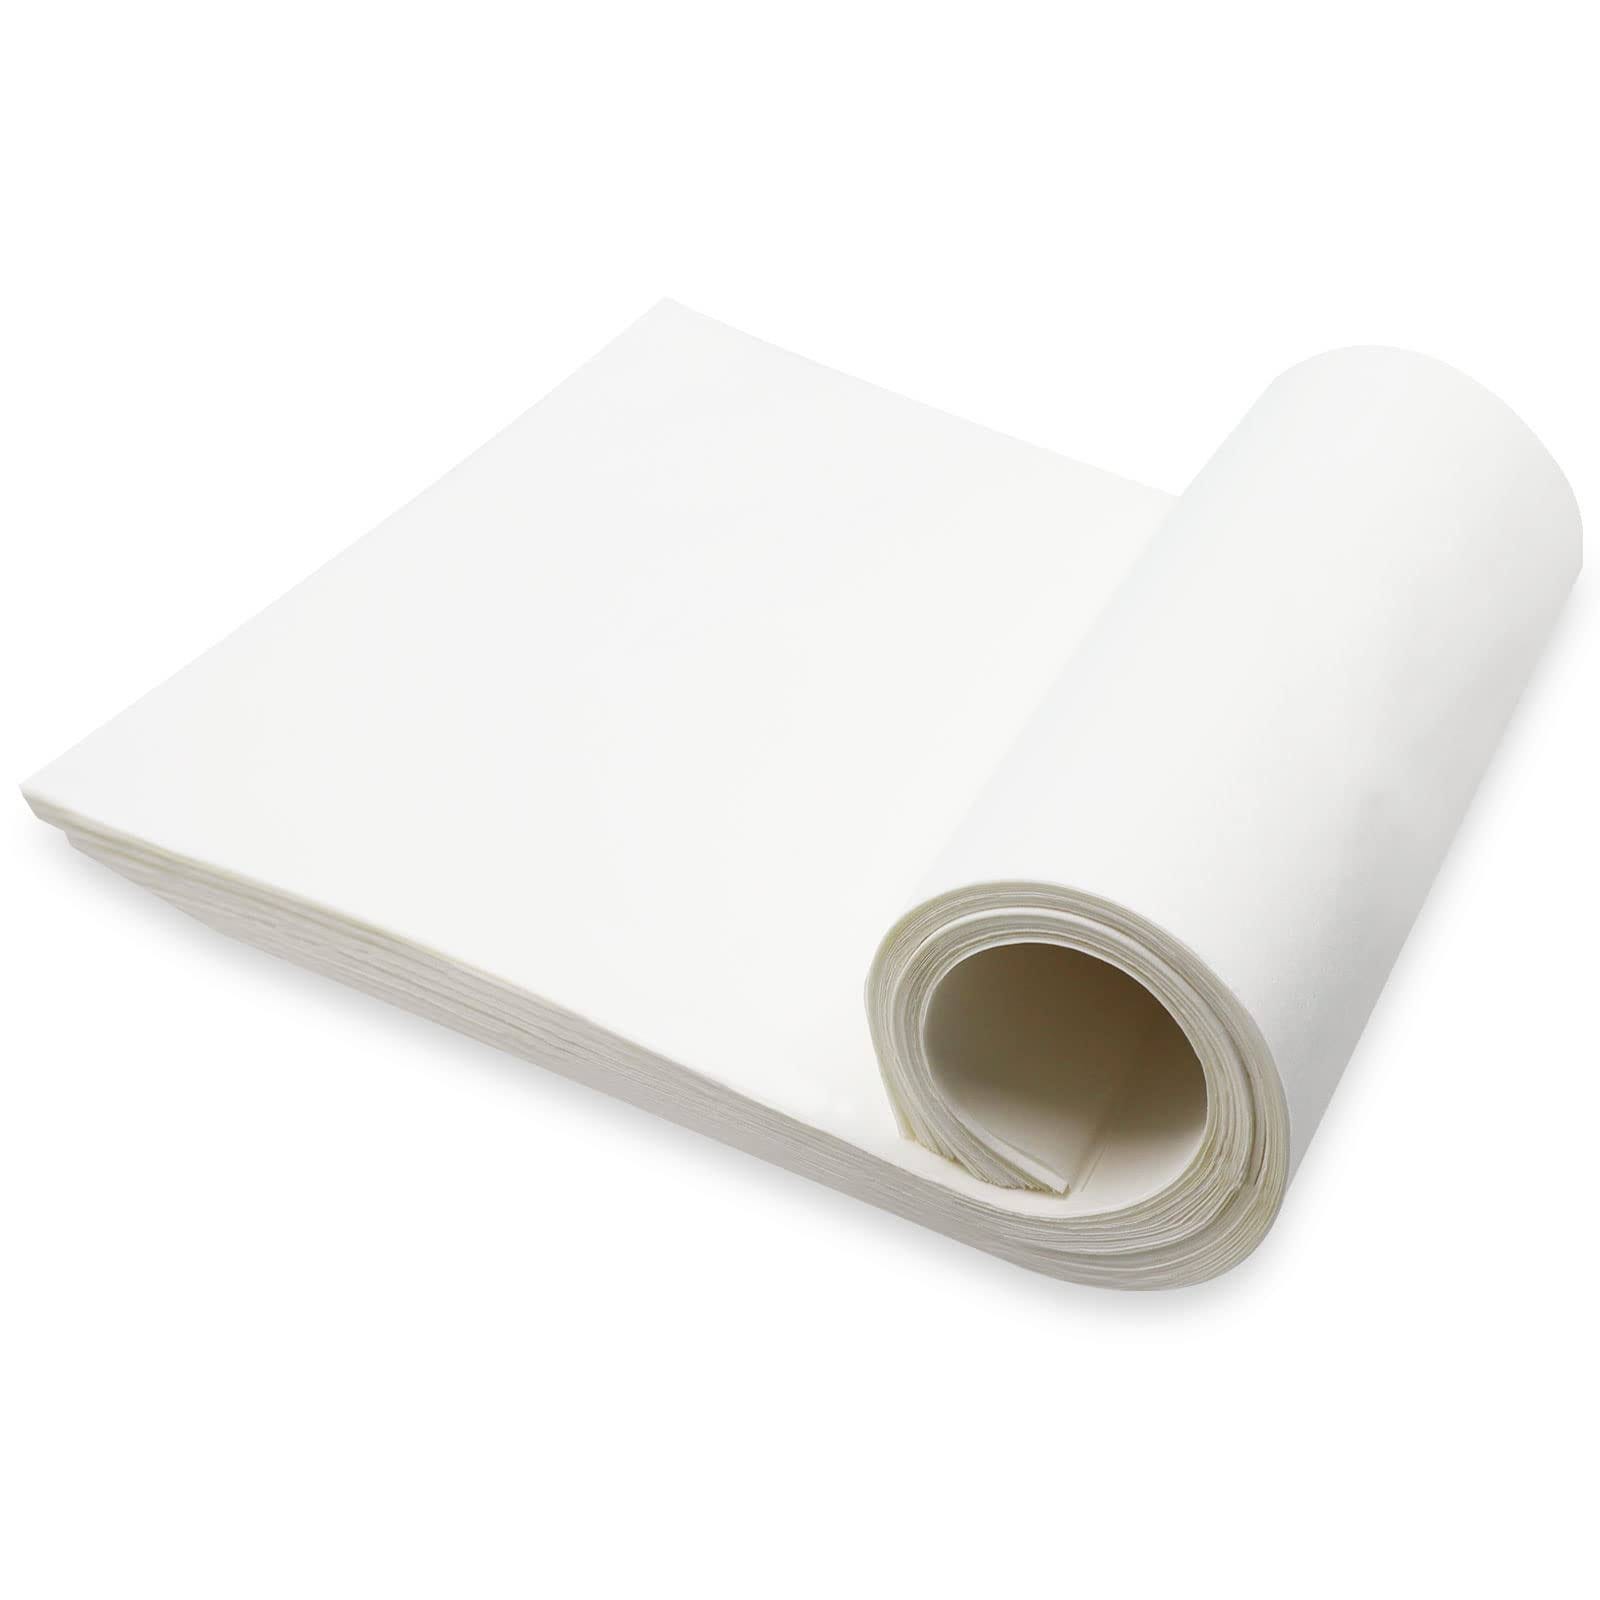 Artist-Grade Sumi Raw Paper for Calligraphy, Painting & Crafts - 90 Premium White Sheets | Image